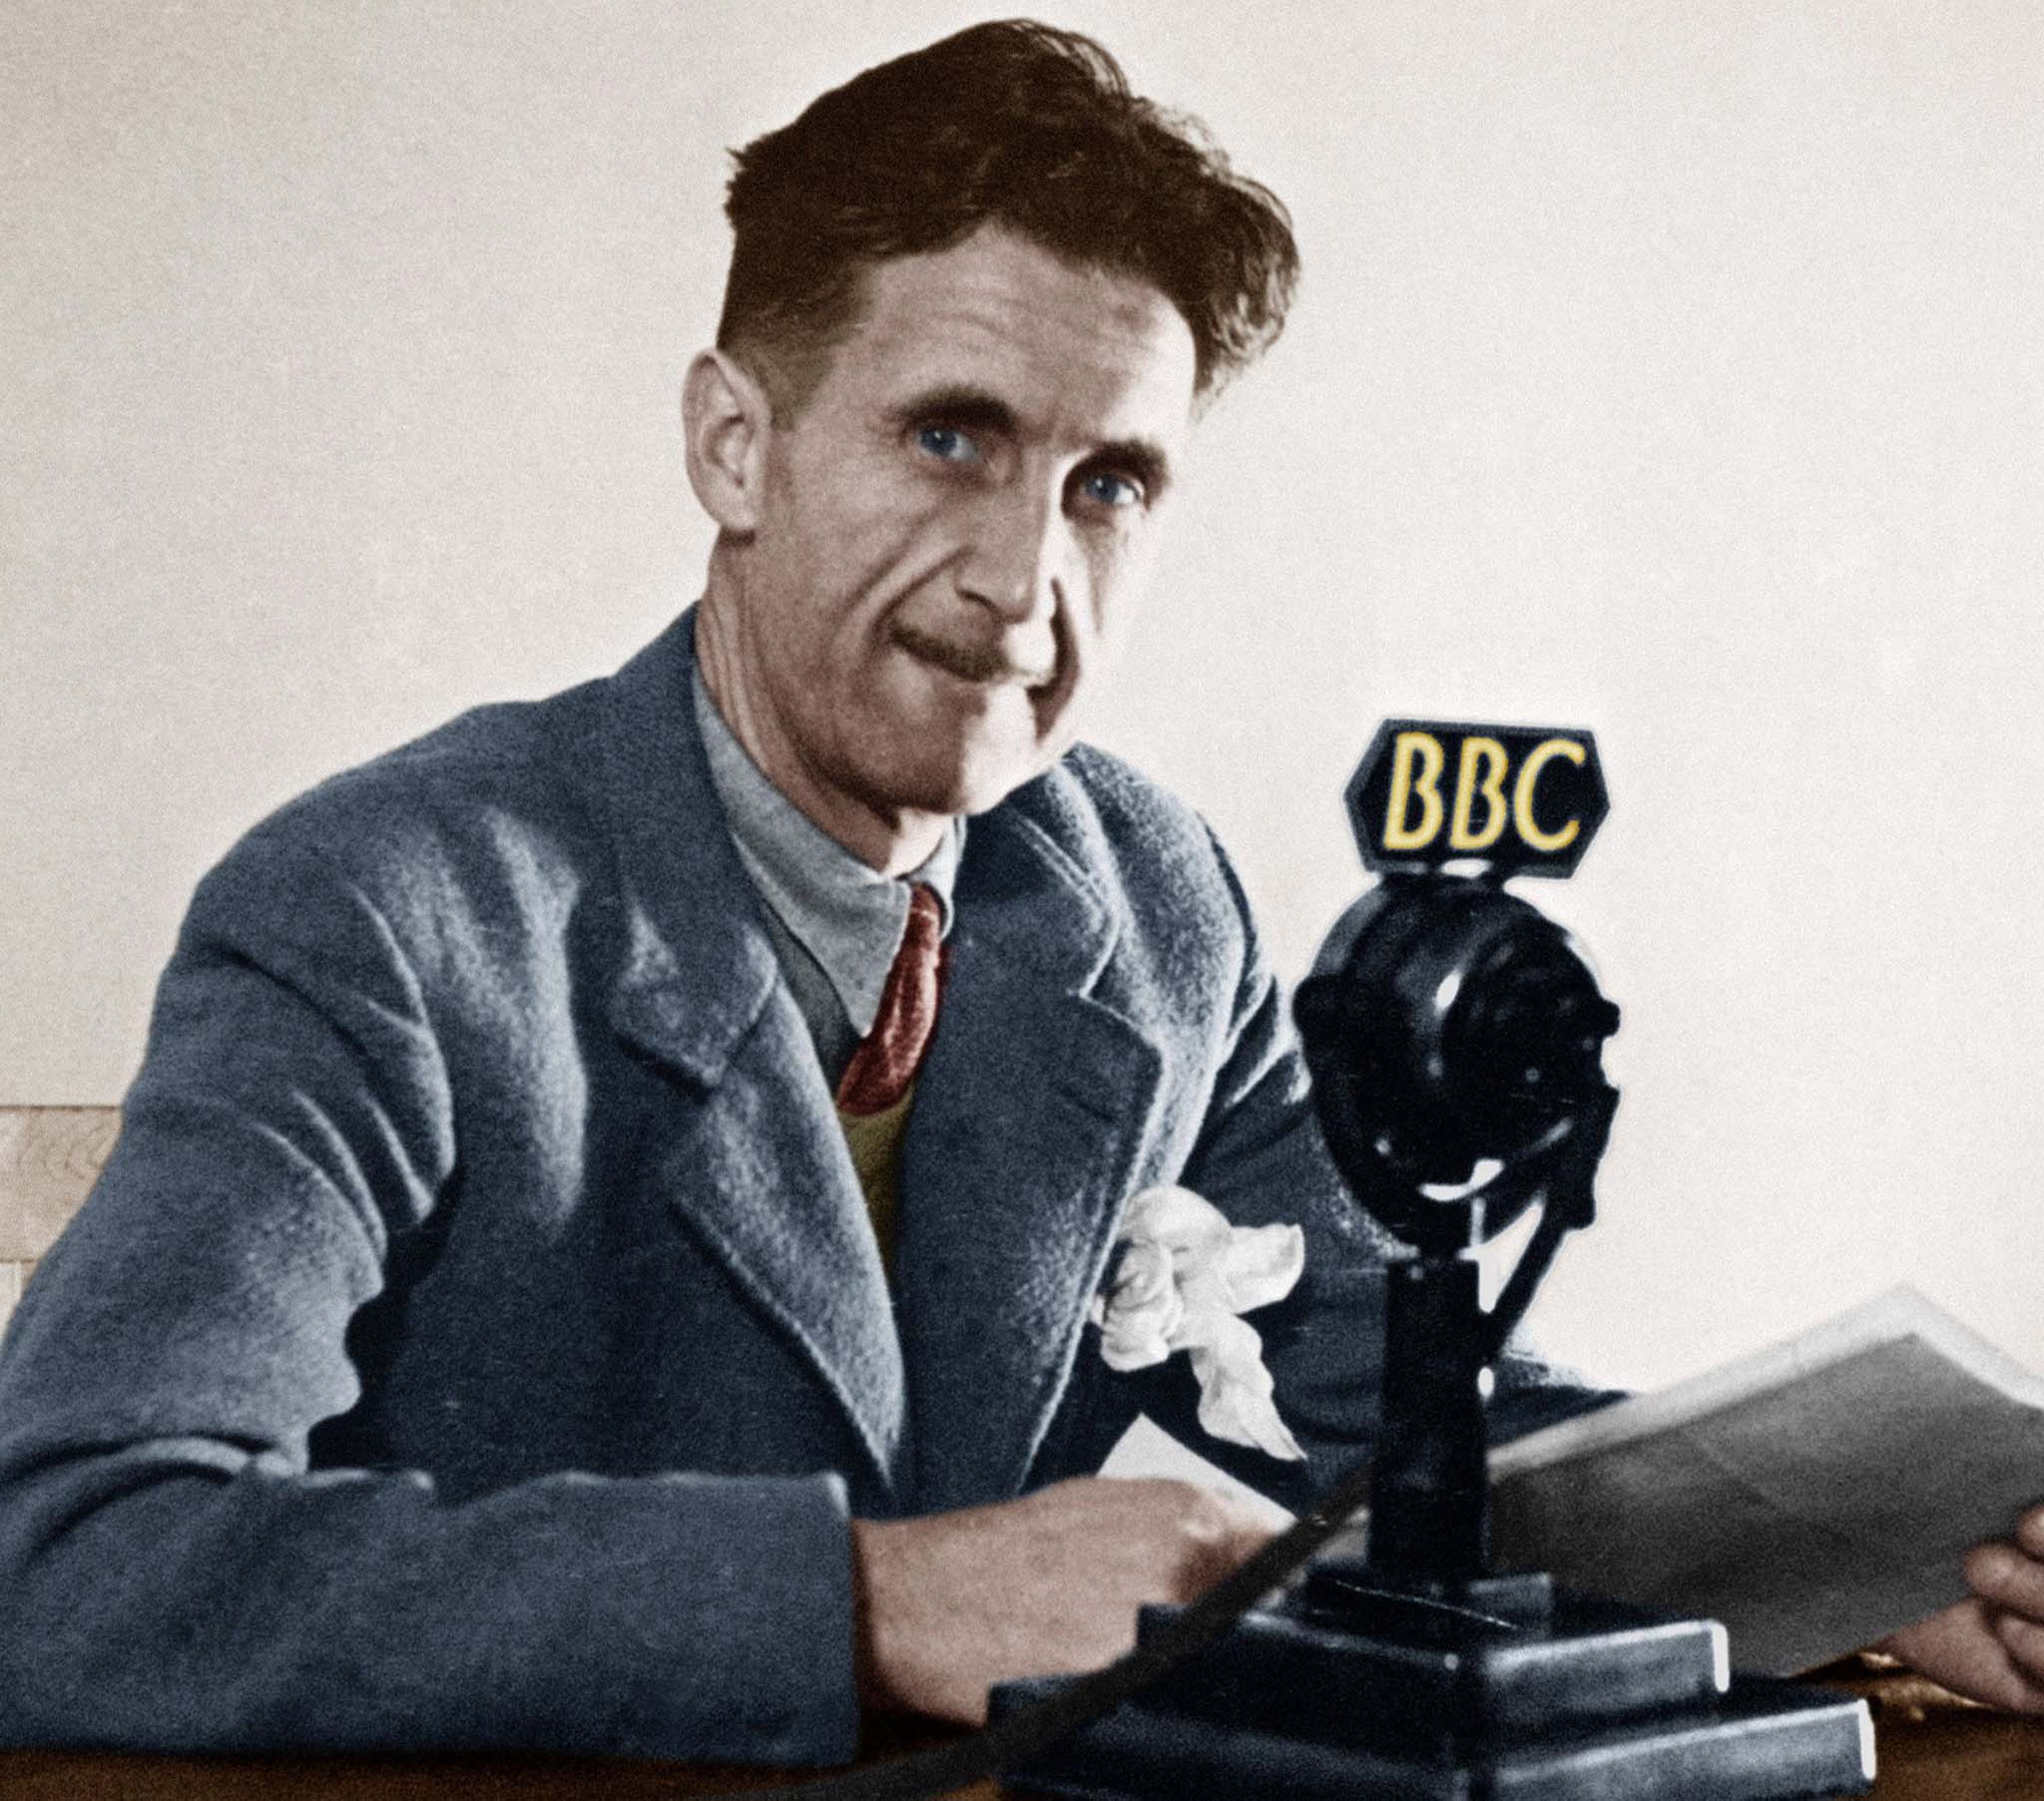 Orwell sought moral and even emotional truths rather than political sophistication